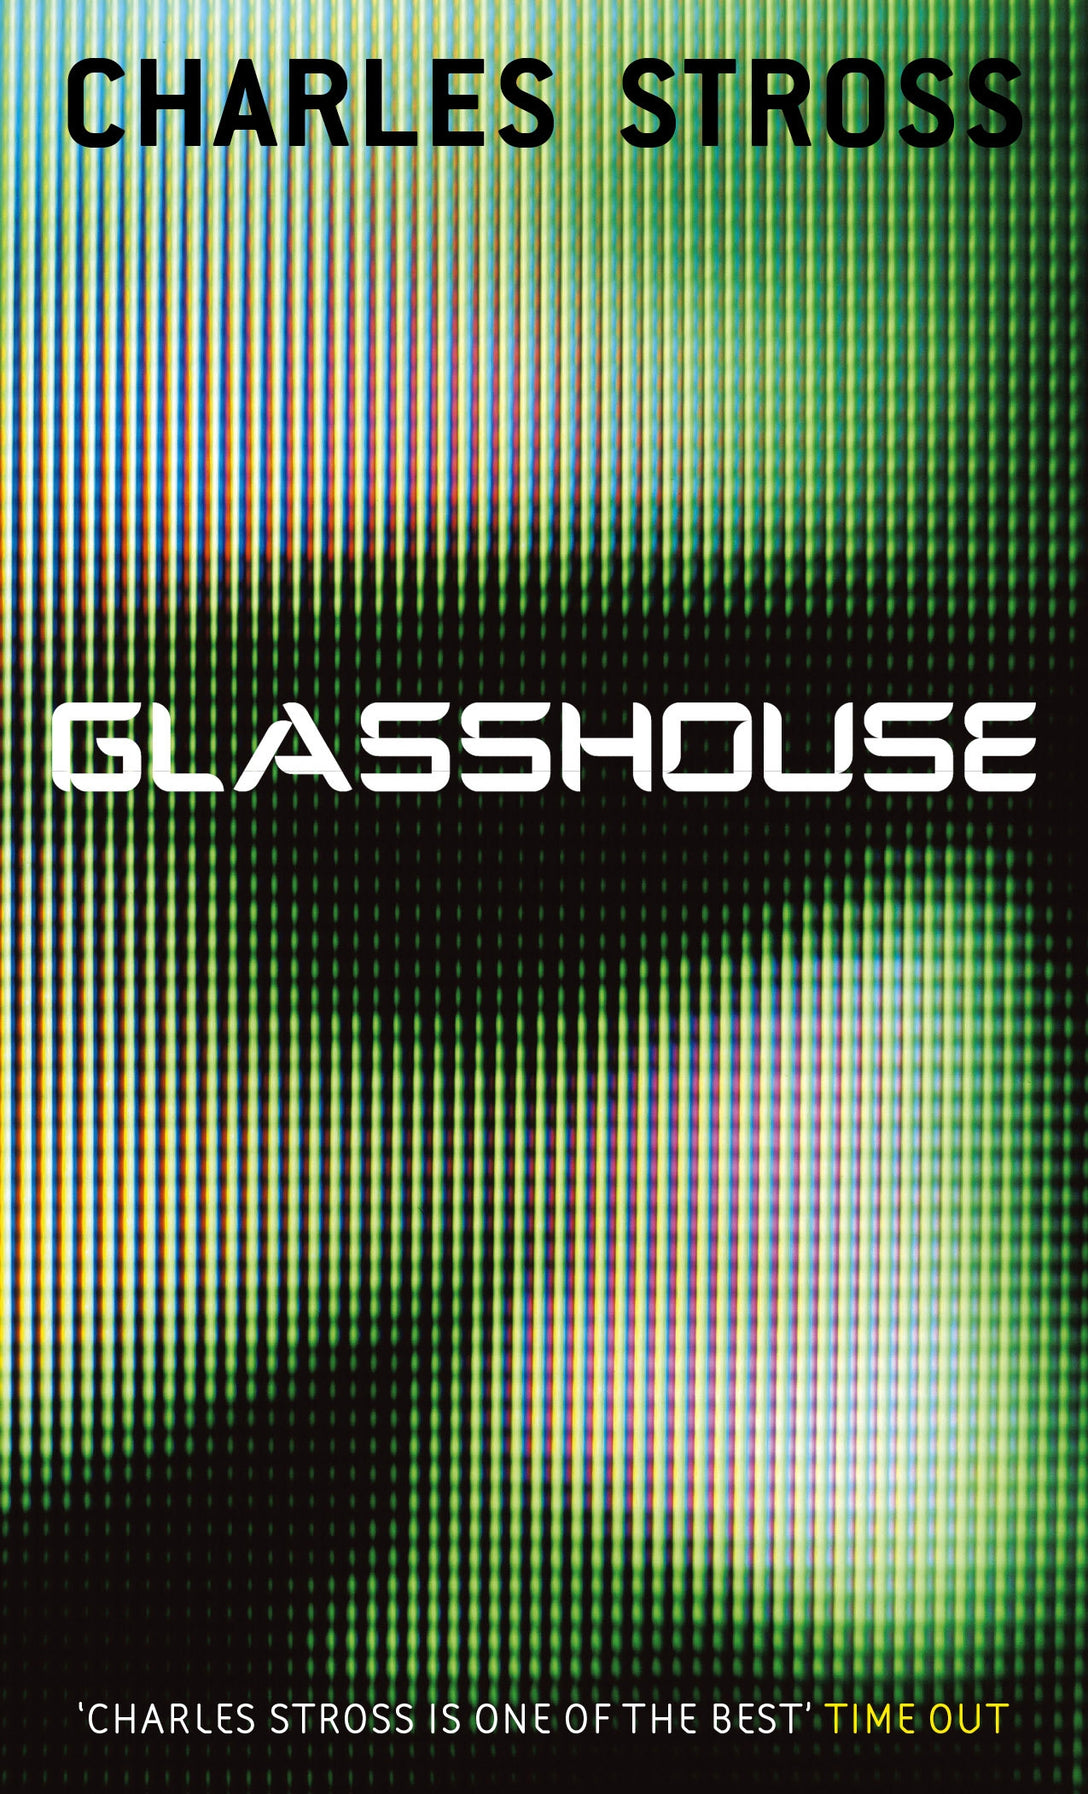 Glasshouse by Charles Stross